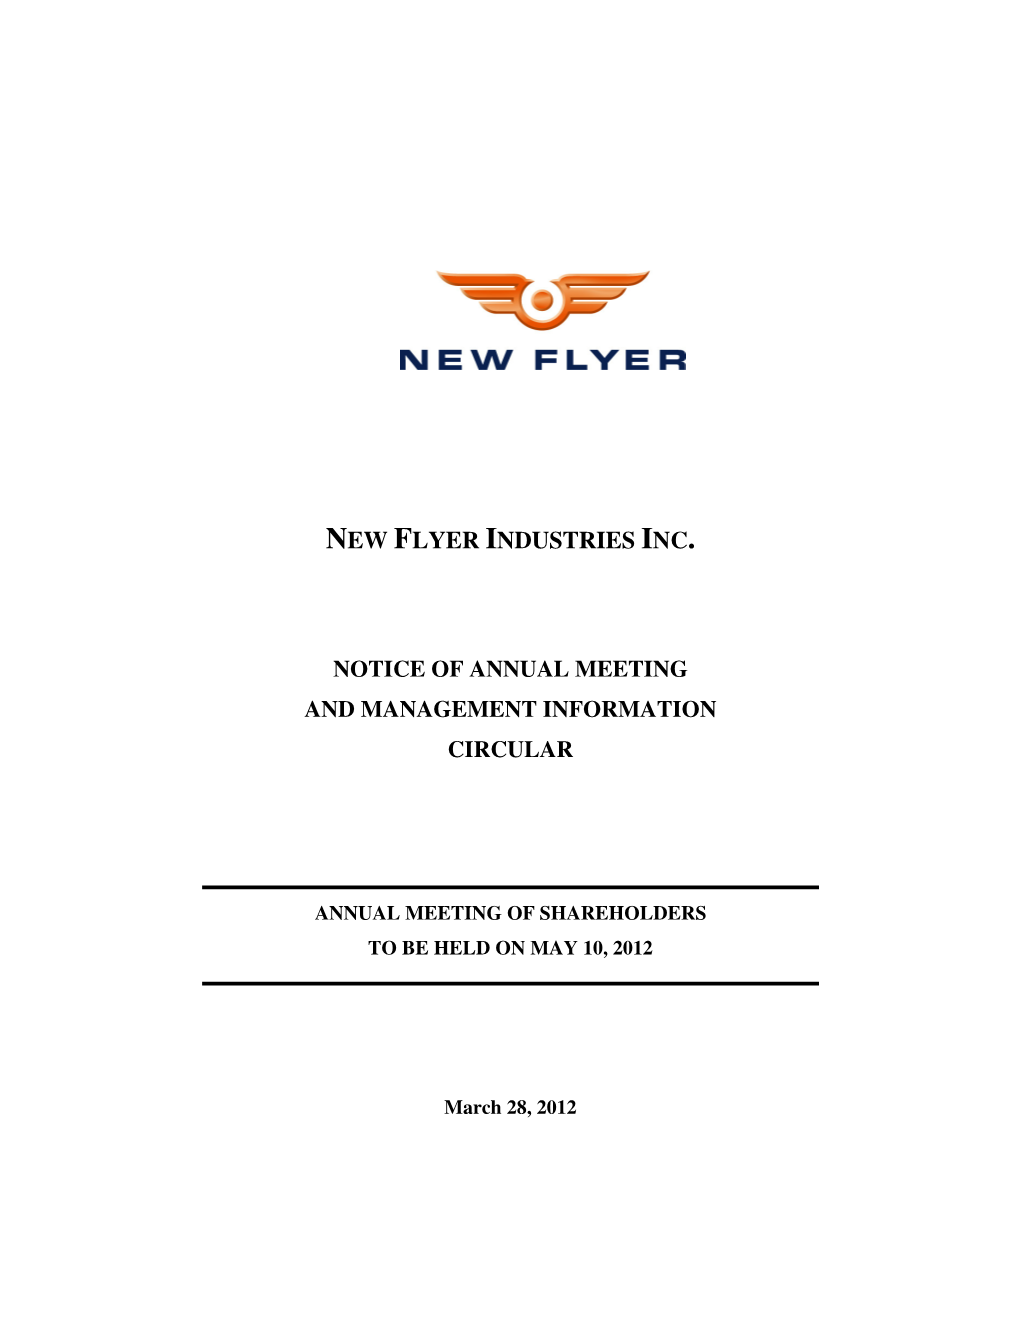 New Flyer Industries Inc. Notice of Annual Meeting and Management Information Circular